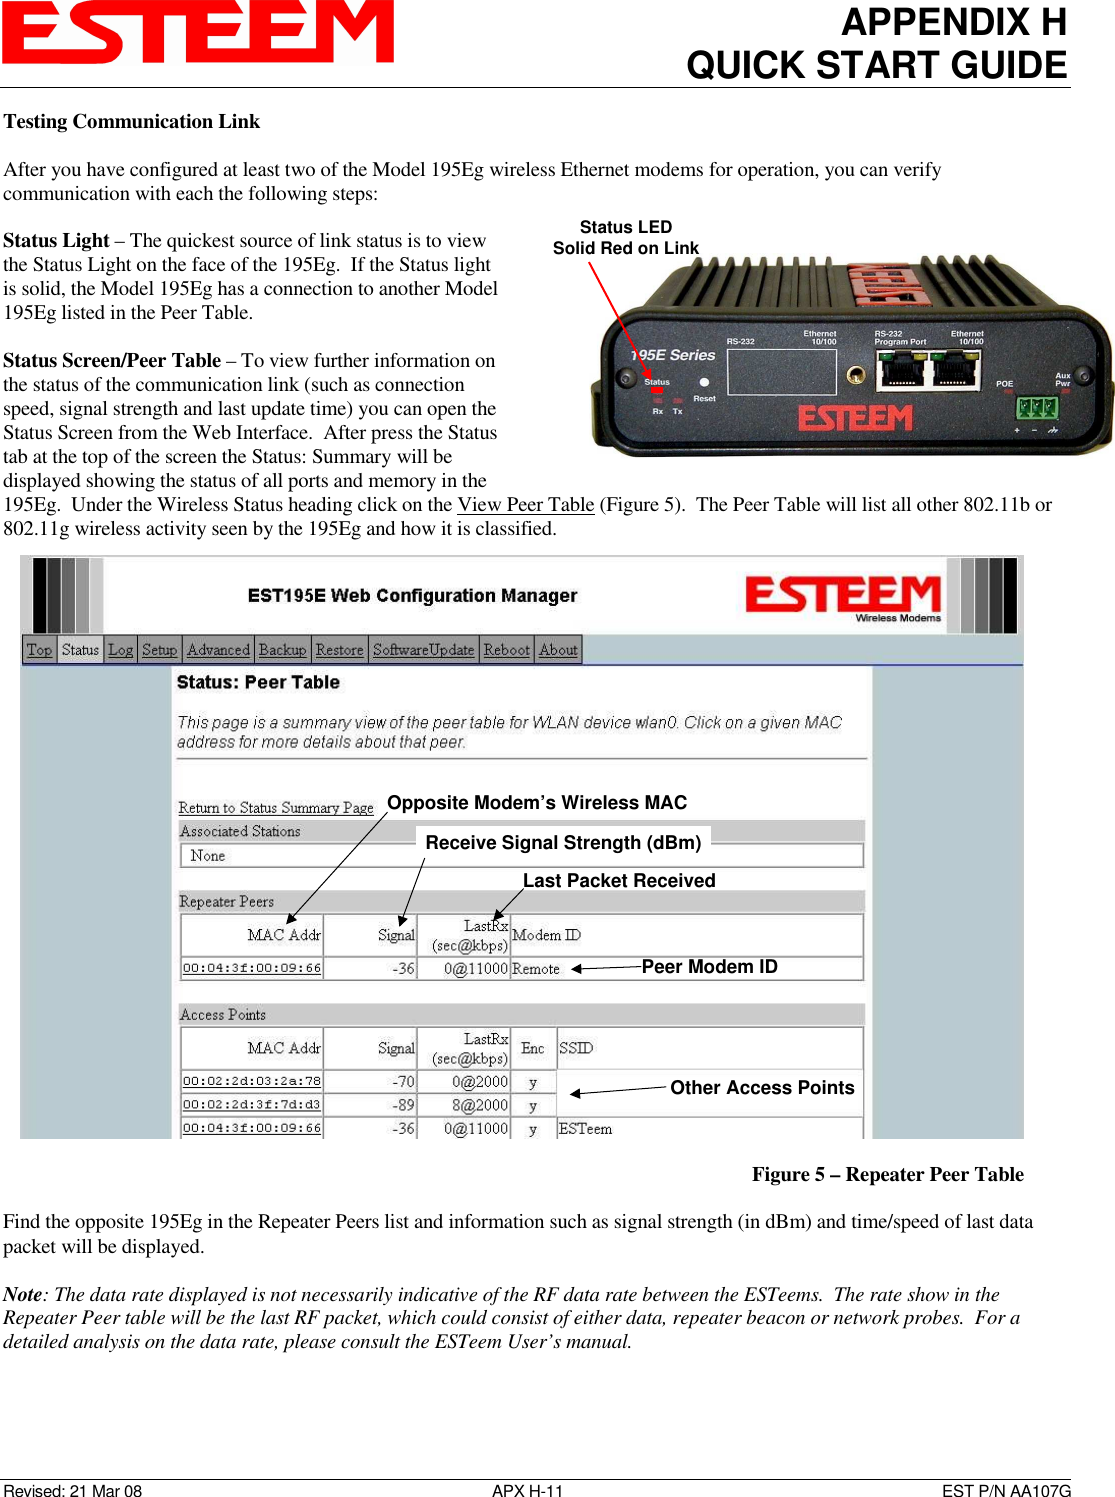 APPENDIX H QUICK START GUIDE  Revised: 21 Mar 08  APX H-11  EST P/N AA107G Testing Communication Link  After you have configured at least two of the Model 195Eg wireless Ethernet modems for operation, you can verify communication with each the following steps:  Status Light – The quickest source of link status is to view the Status Light on the face of the 195Eg.  If the Status light is solid, the Model 195Eg has a connection to another Model 195Eg listed in the Peer Table.  Status Screen/Peer Table – To view further information on the status of the communication link (such as connection speed, signal strength and last update time) you can open the Status Screen from the Web Interface.  After press the Status tab at the top of the screen the Status: Summary will be displayed showing the status of all ports and memory in the 195Eg.  Under the Wireless Status heading click on the View Peer Table (Figure 5).  The Peer Table will list all other 802.11b or 802.11g wireless activity seen by the 195Eg and how it is classified.    Find the opposite 195Eg in the Repeater Peers list and information such as signal strength (in dBm) and time/speed of last data packet will be displayed.  Note: The data rate displayed is not necessarily indicative of the RF data rate between the ESTeems.  The rate show in the Repeater Peer table will be the last RF packet, which could consist of either data, repeater beacon or network probes.  For a detailed analysis on the data rate, please consult the ESTeem User’s manual.  Status LEDSolid Red on Link  Opposite Modem’s Wireless MACReceive Signal Strength (dBm)Last Packet ReceivedPeer Modem IDOther Access Points  Figure 5 – Repeater Peer Table 